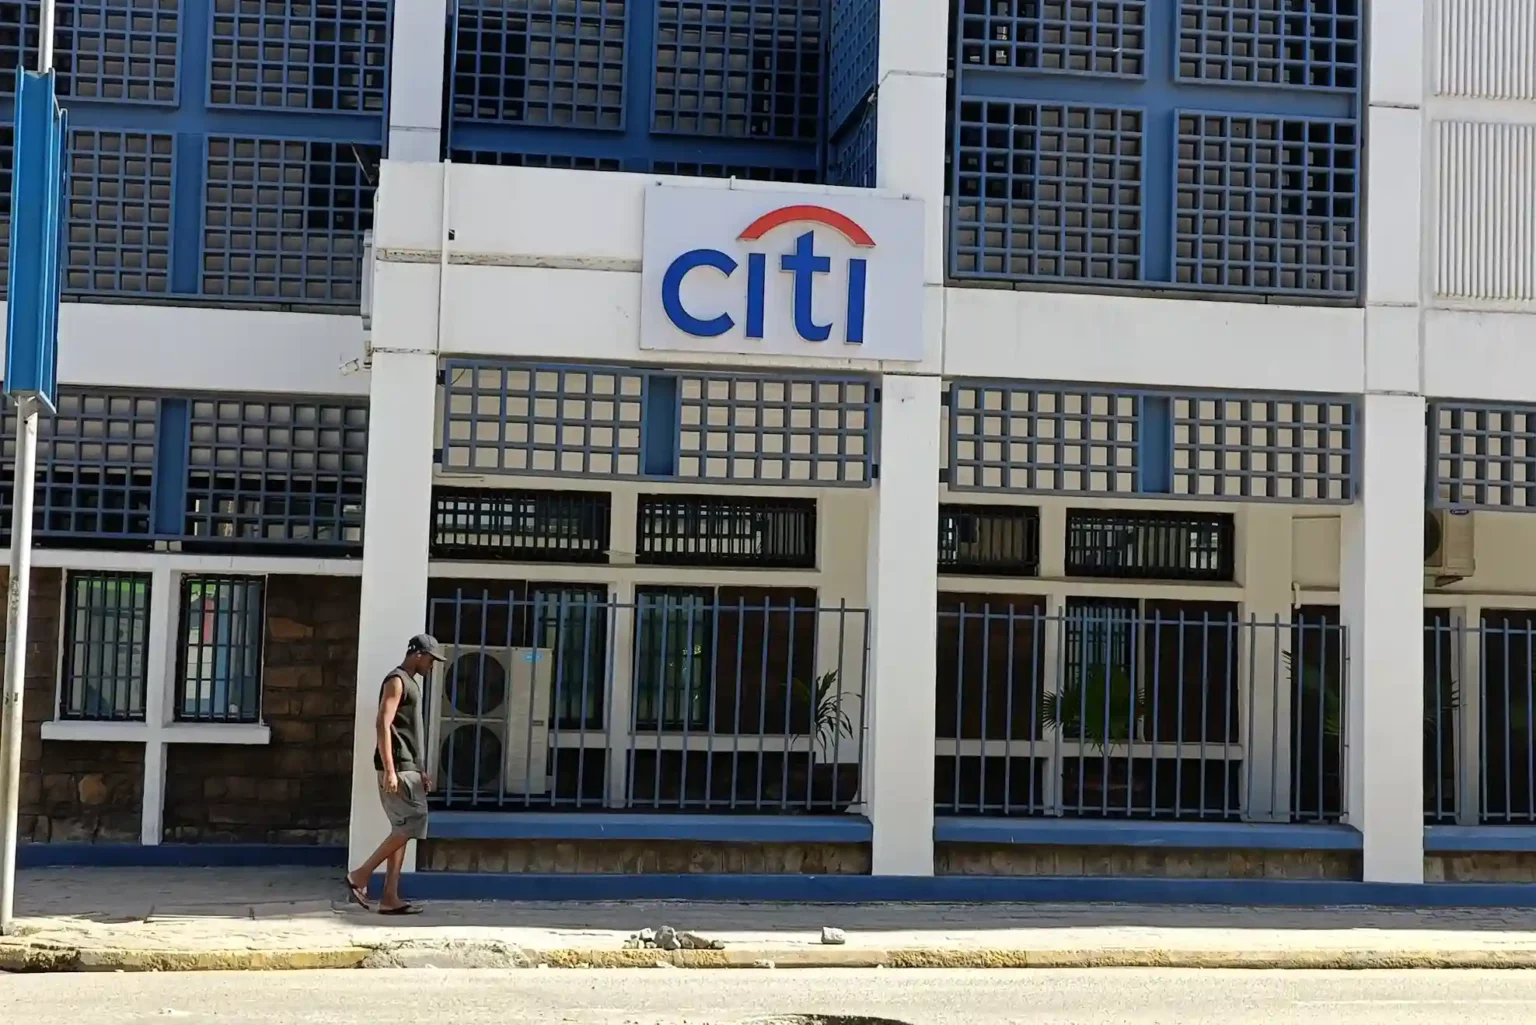 Citi Bank branch in Mombasa City. Kenya’s National Treasury has appointed Citi and Standard Bank as joint lead managers to assess potential US$ bond options for Kenya in the international capital markets.